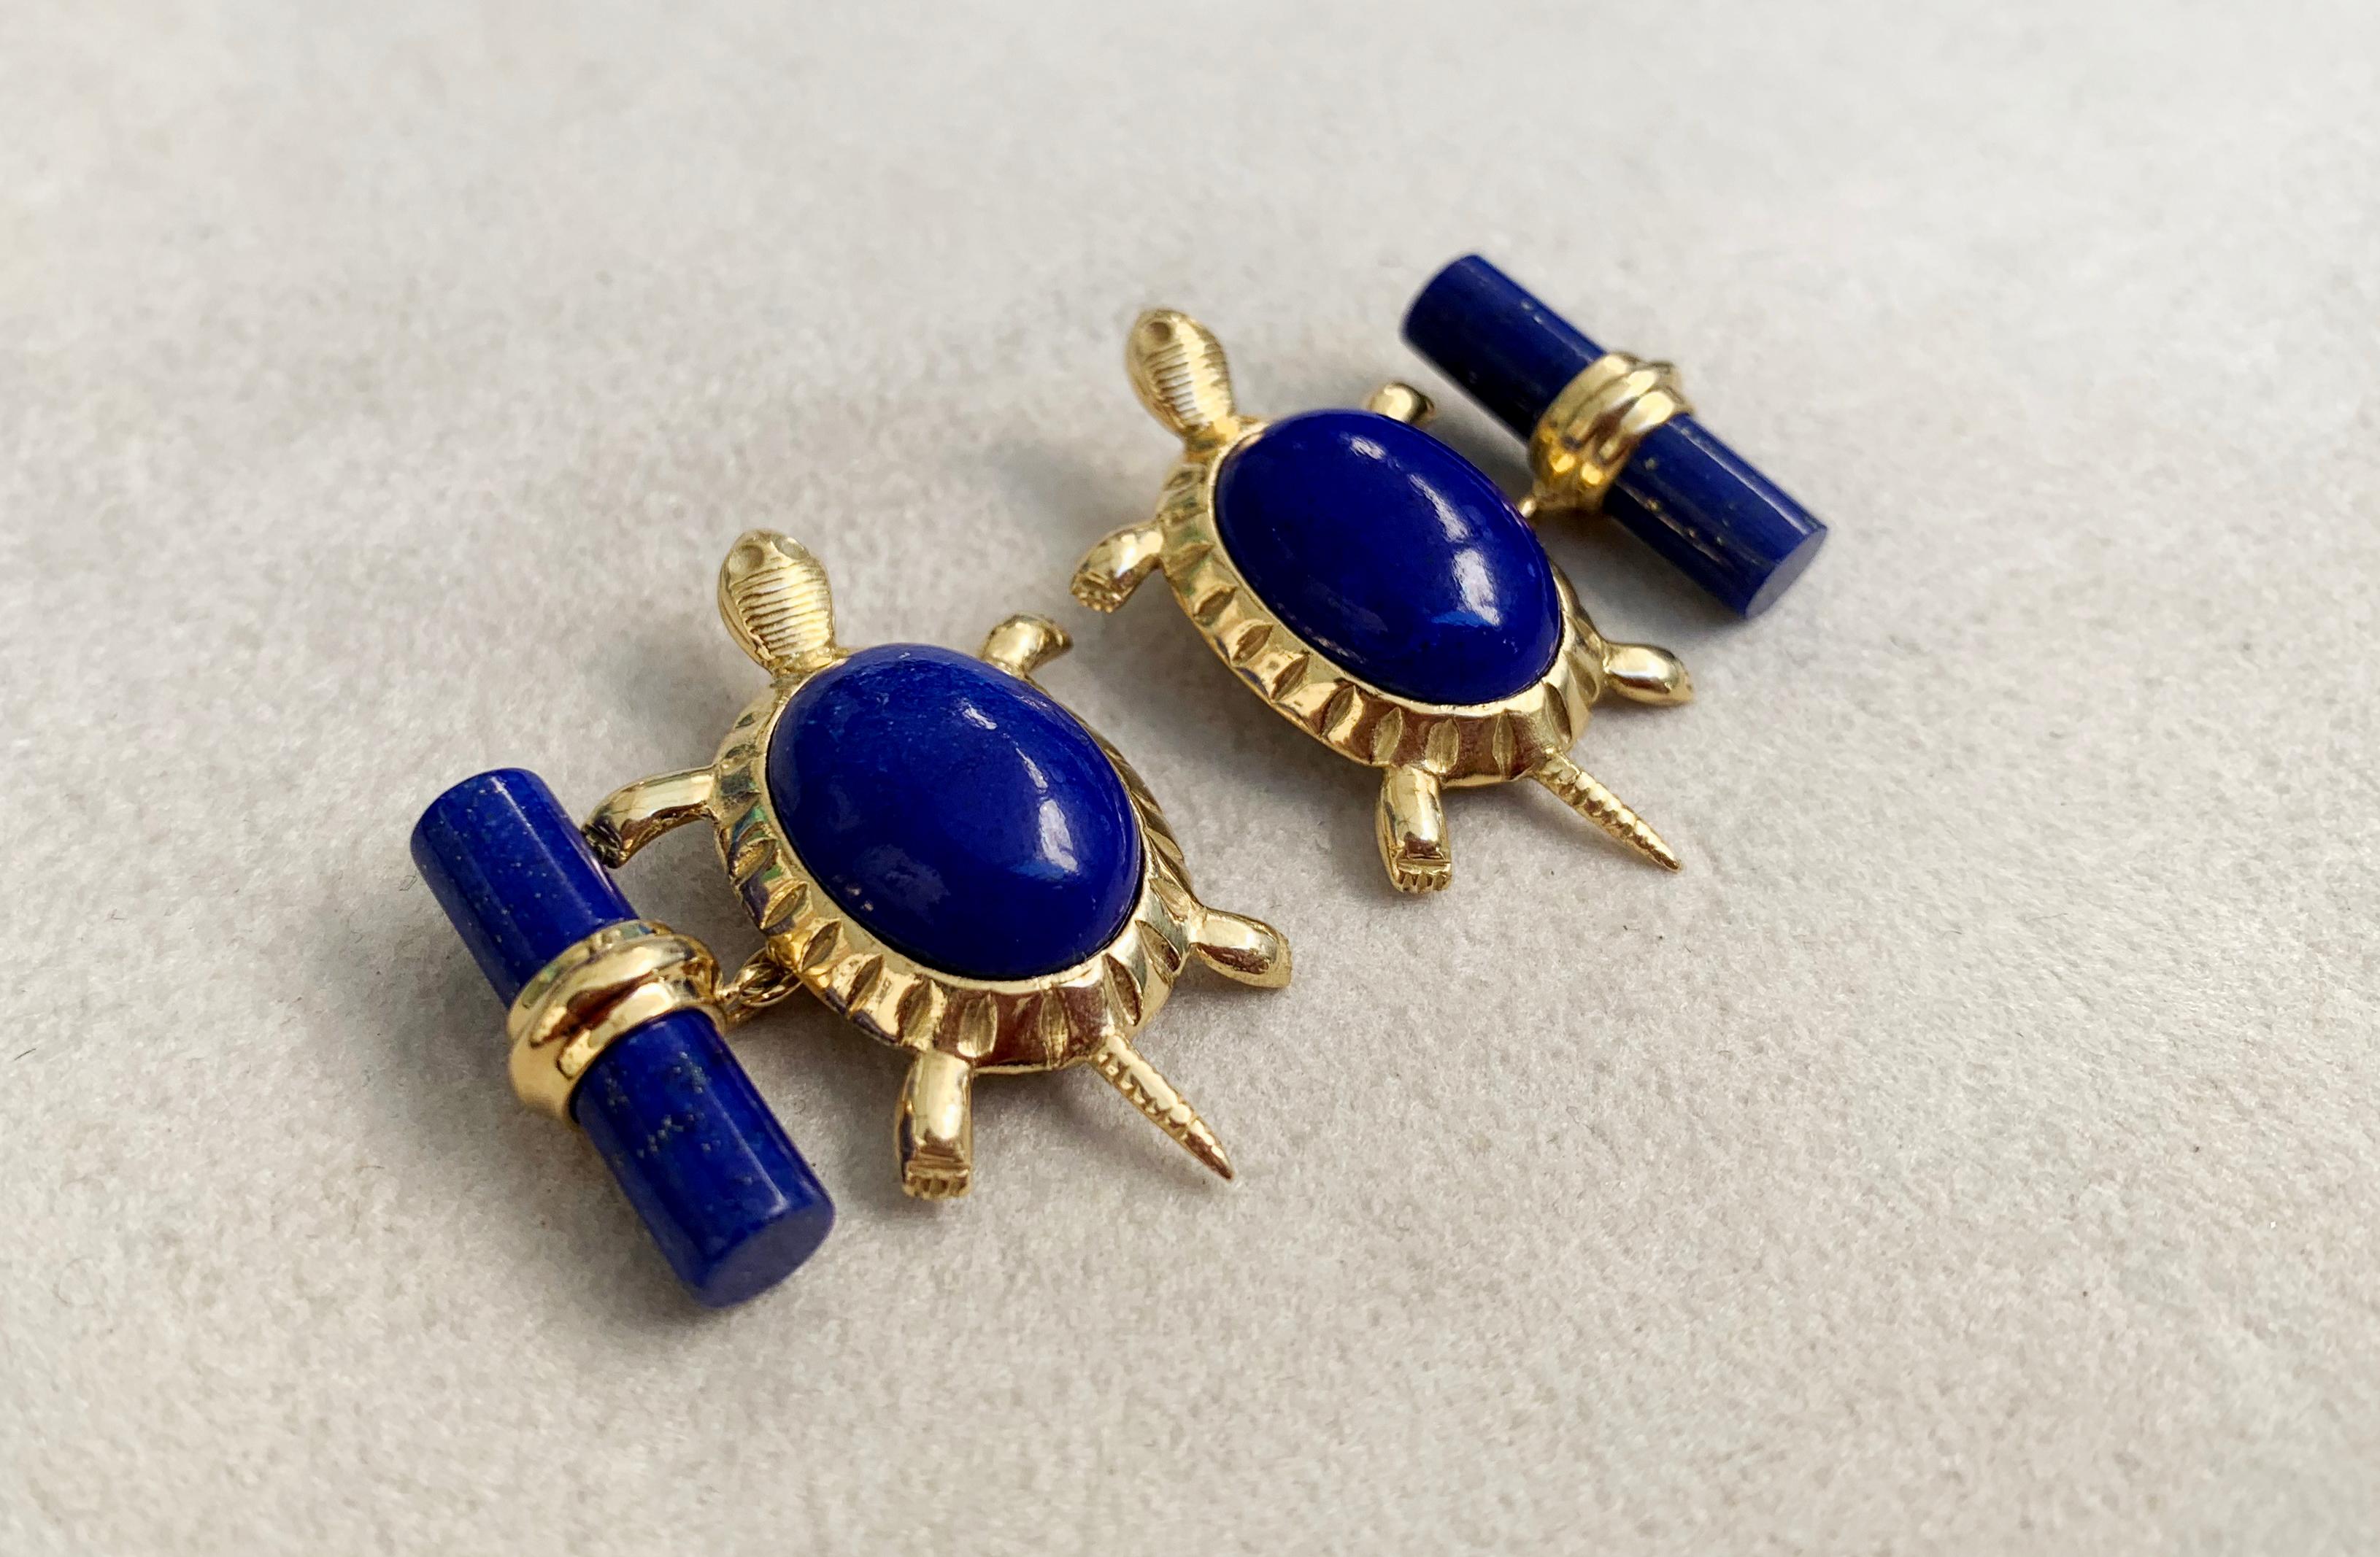 These unique cufflinks combine the deep blue of lapis lazuli with the warmth of 18 karat yellow gold. 
The precious metal is used to make the post and mounting of the front face in the shape of the legs and tail of a turtle, while the cylindrical